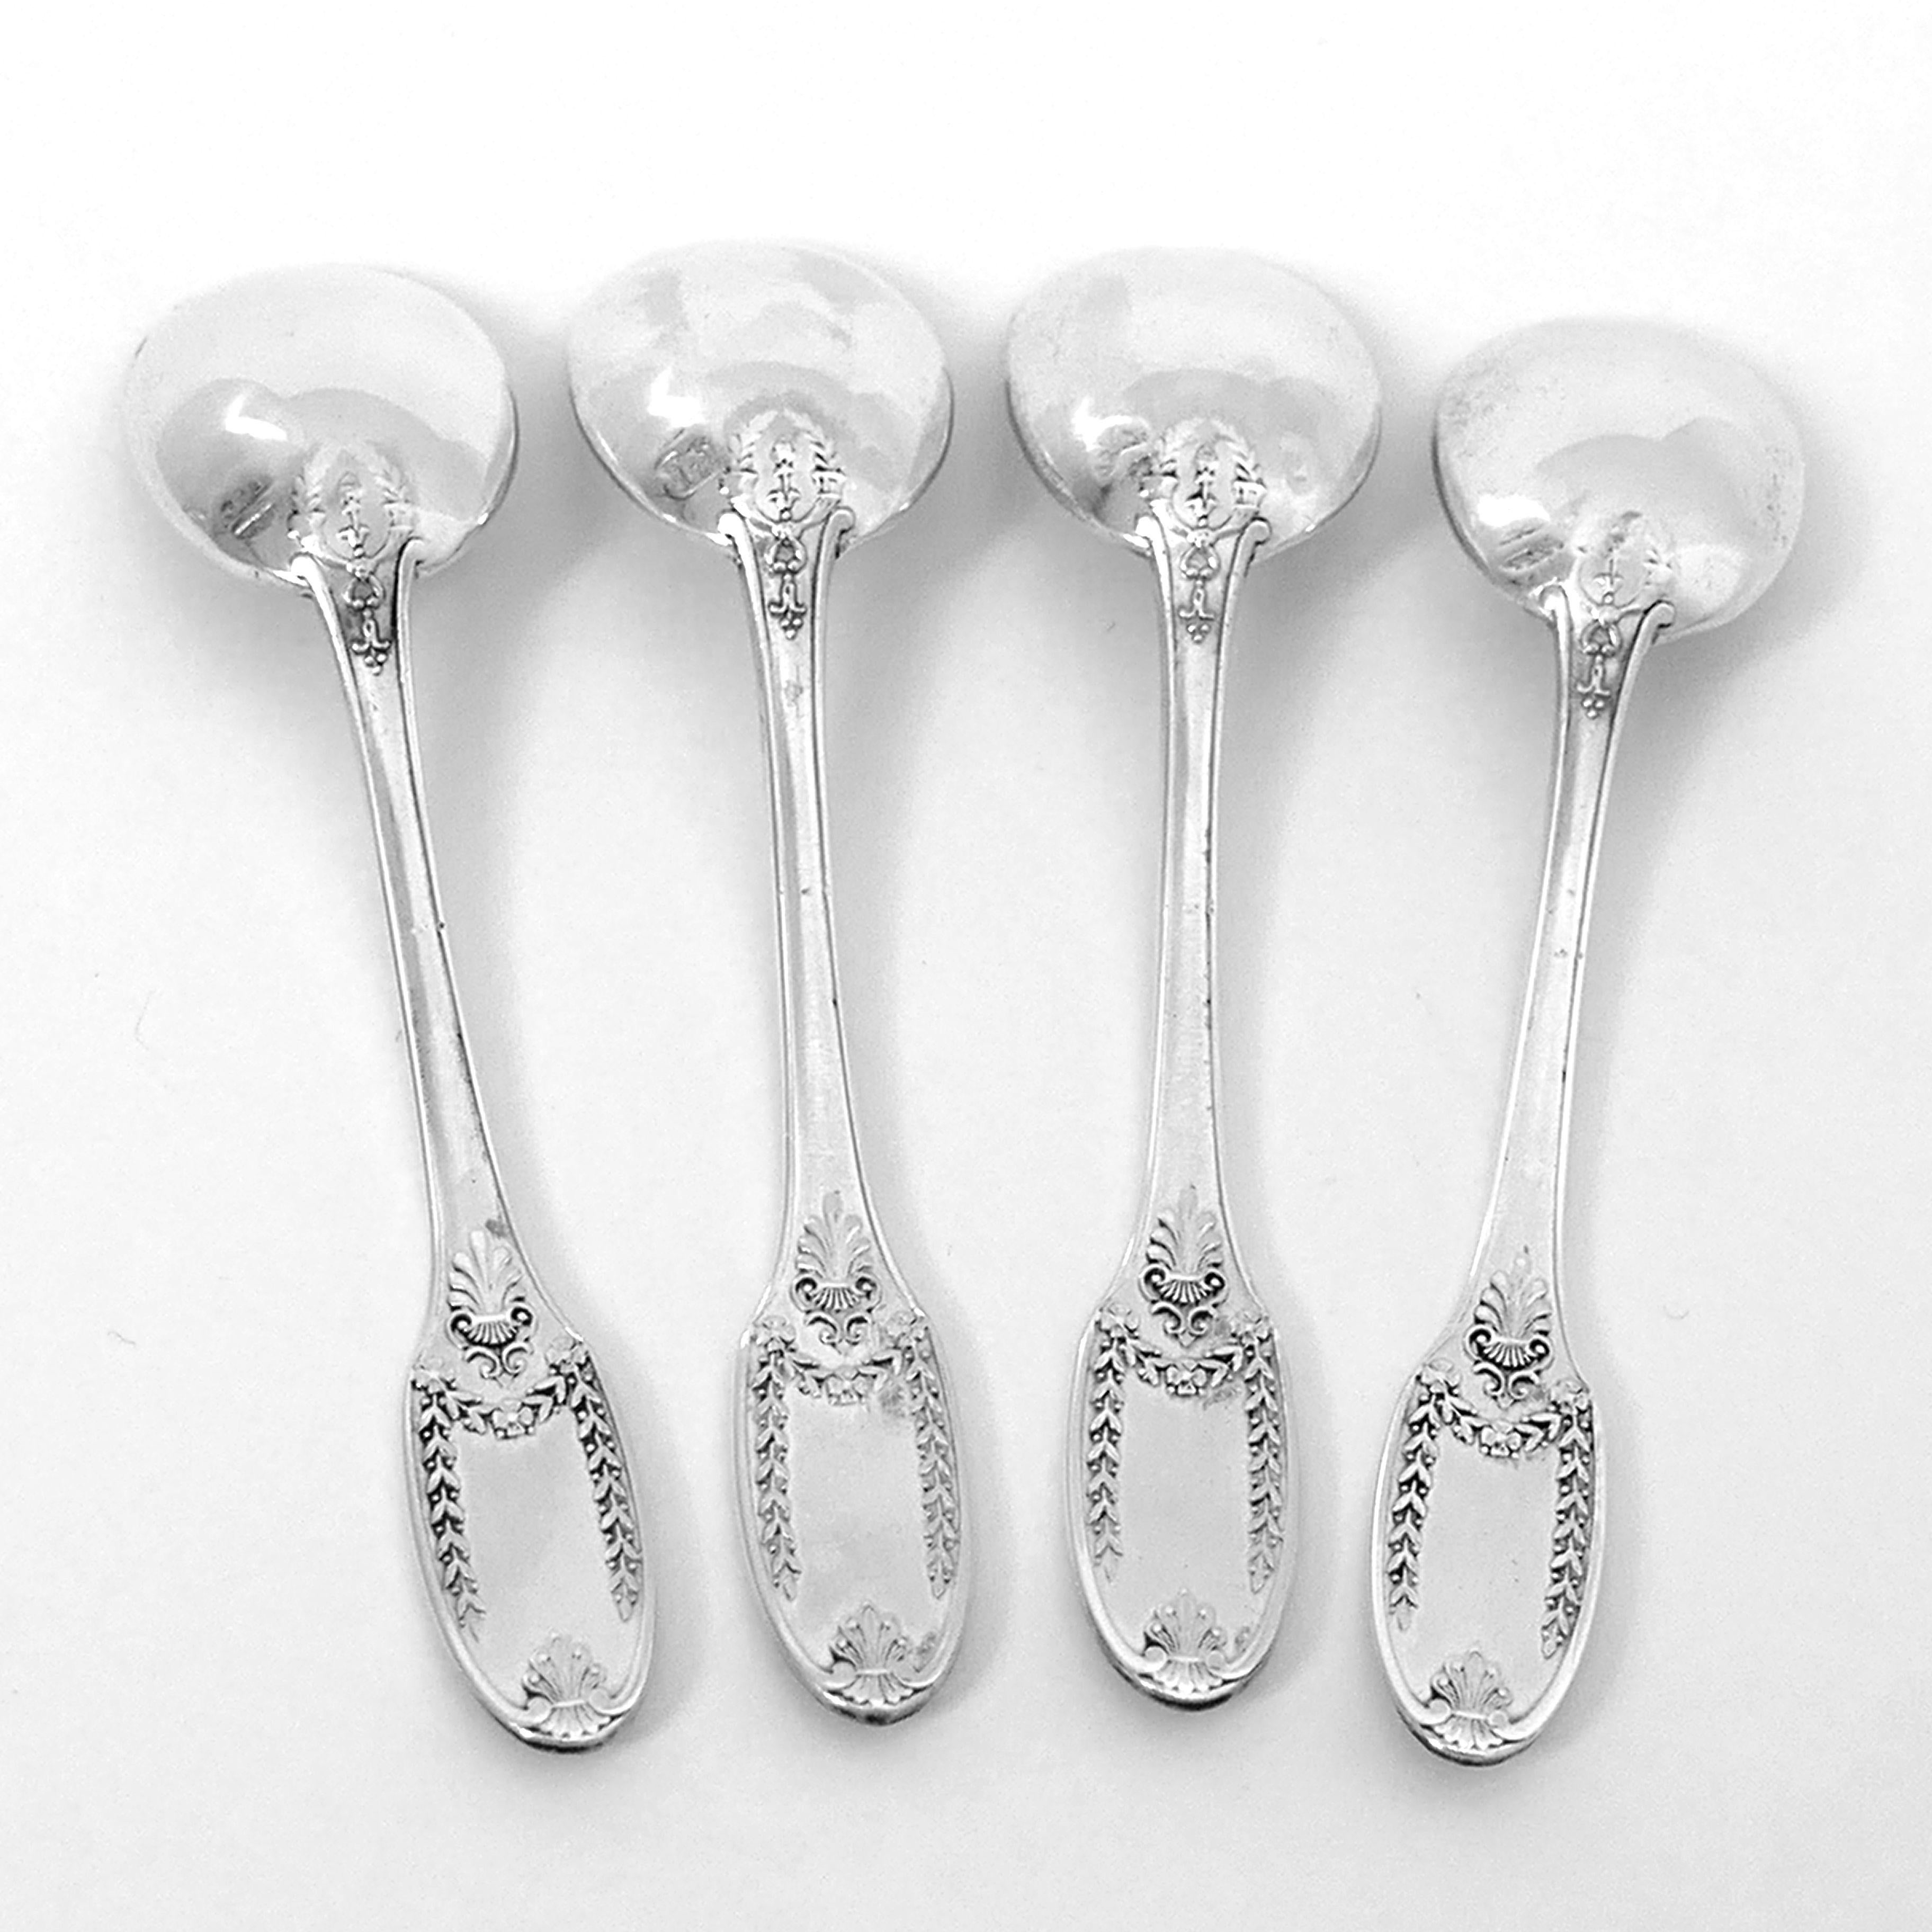 Puiforcat French Sterling Silver Set of Four Salt Cellars with Spoons 2